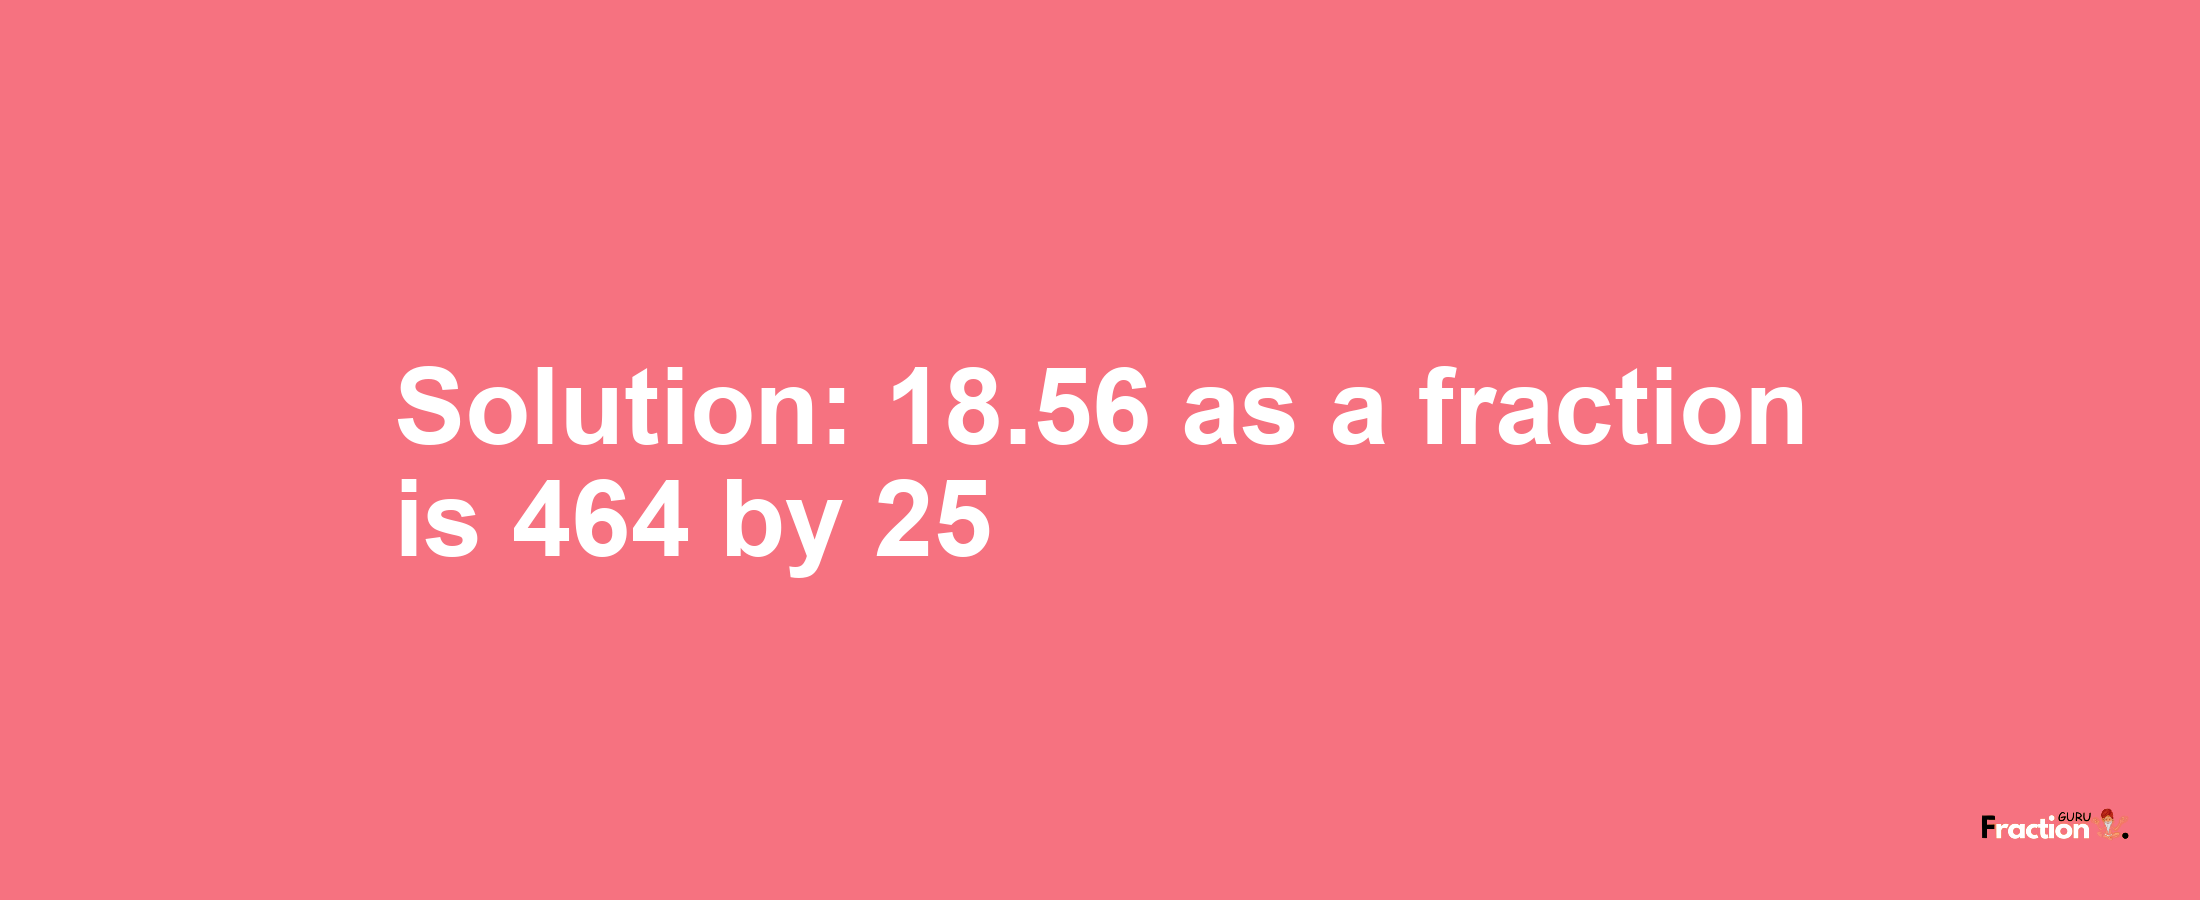 Solution:18.56 as a fraction is 464/25